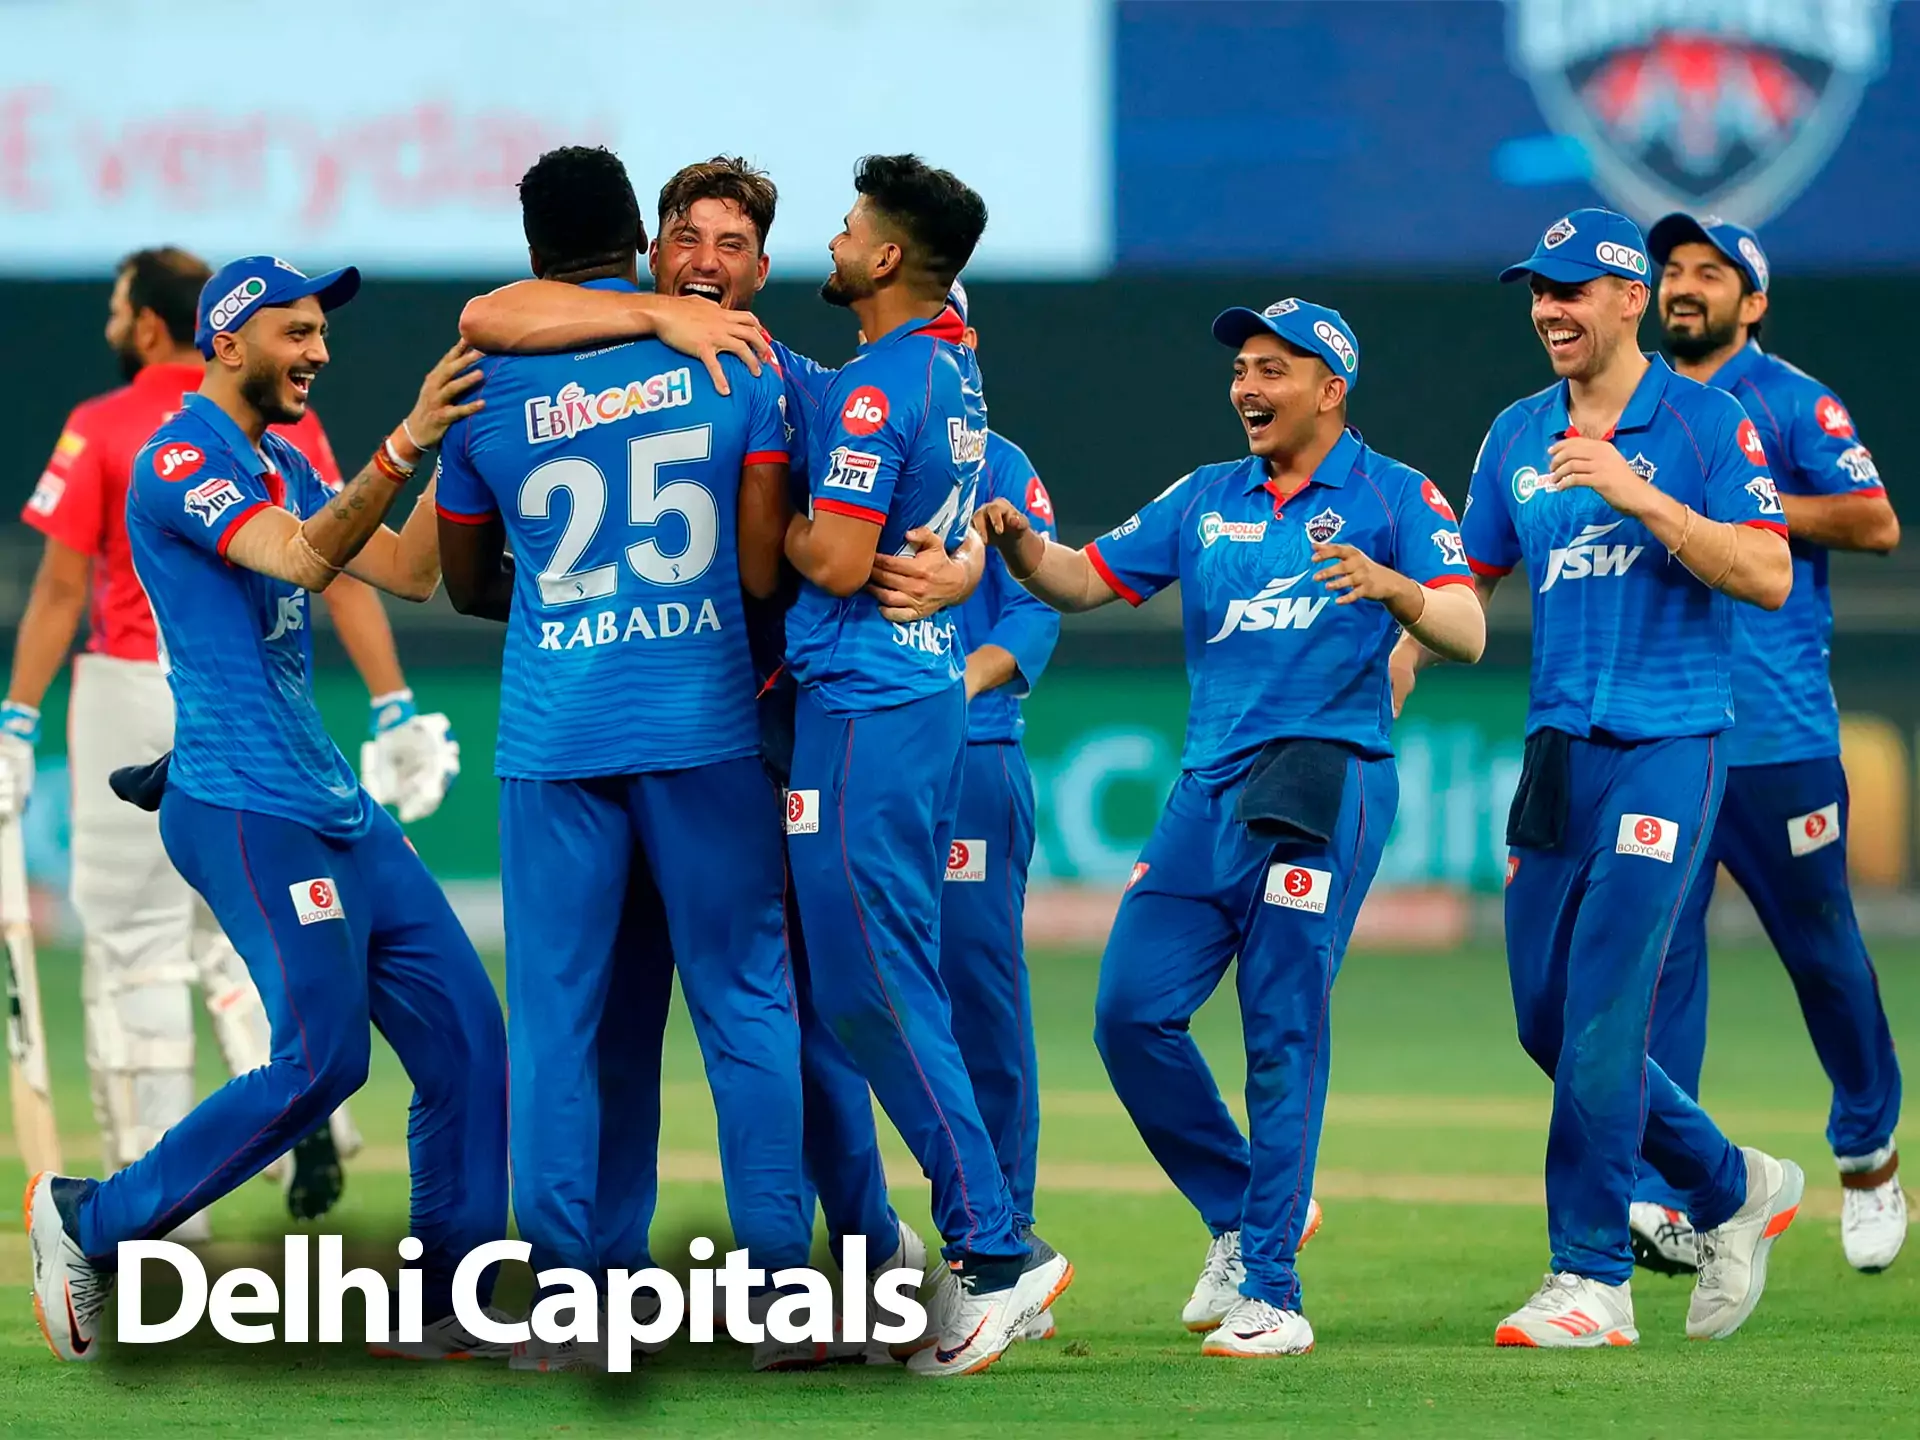 High odds will let you win a lot of money from this IPL team.